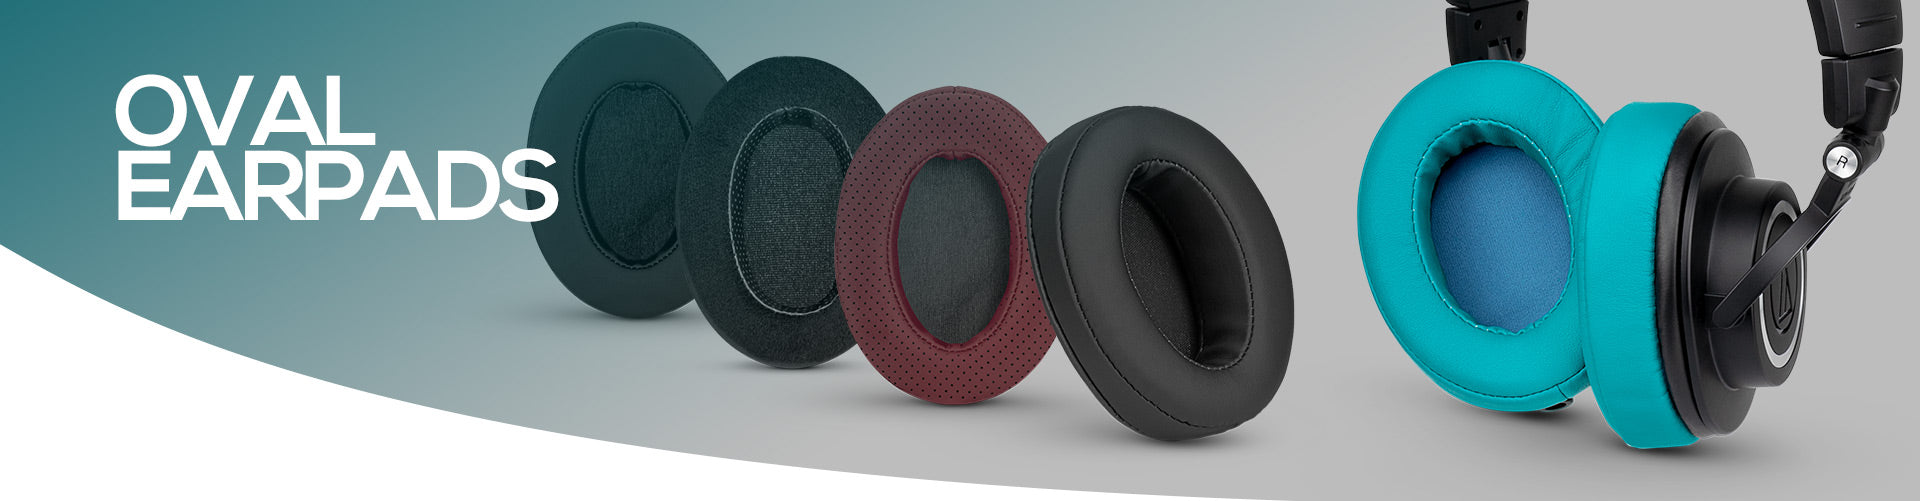 Replacement Oval Earpads